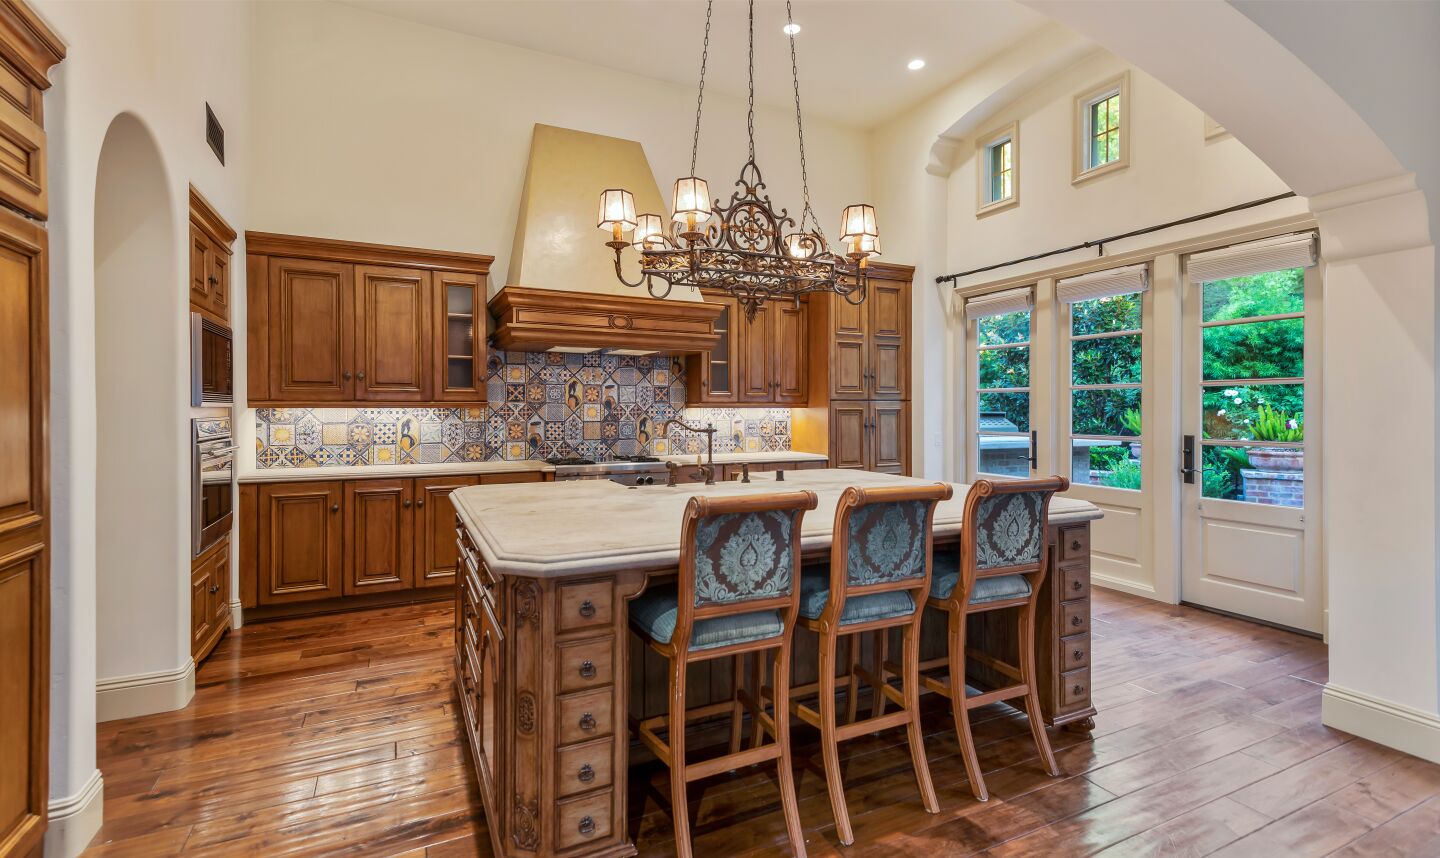 A dramatic chandelier, an island with limestone countertop and Spanish tile in the kitchen.